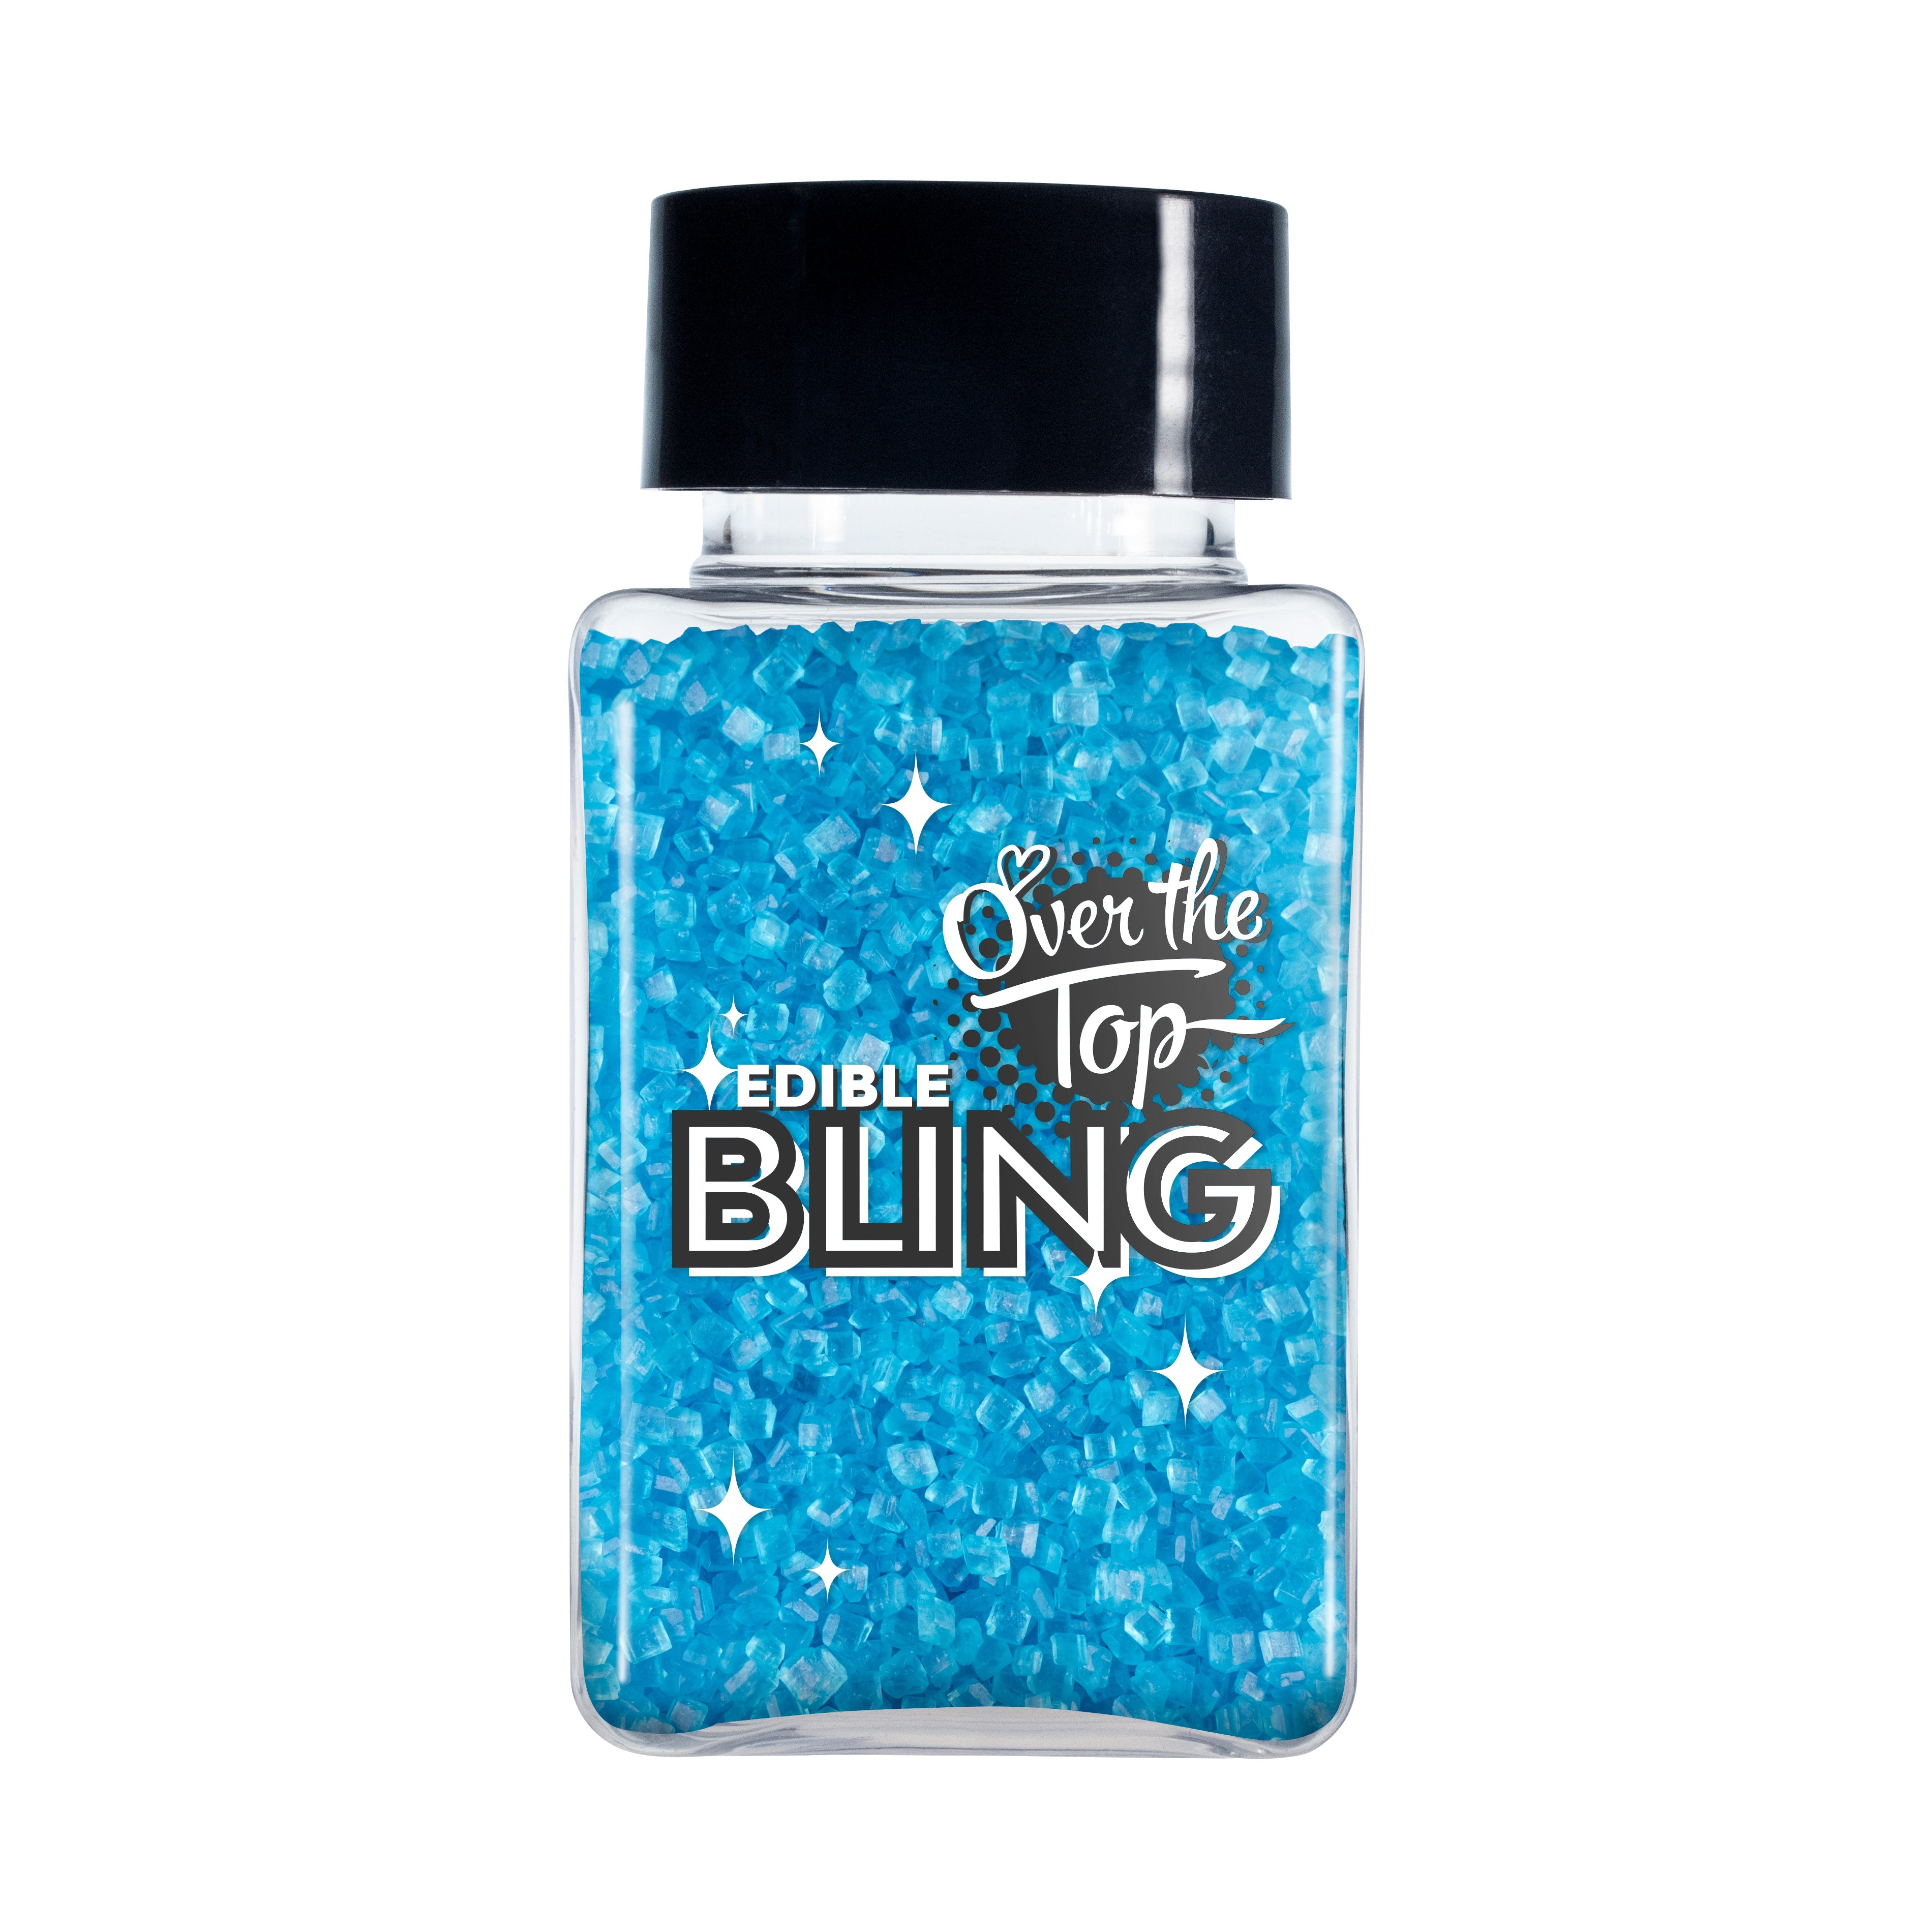 Over The Top Edible Bling Sanding Sugar - Blue 80g (Best Before 5/01/2023)